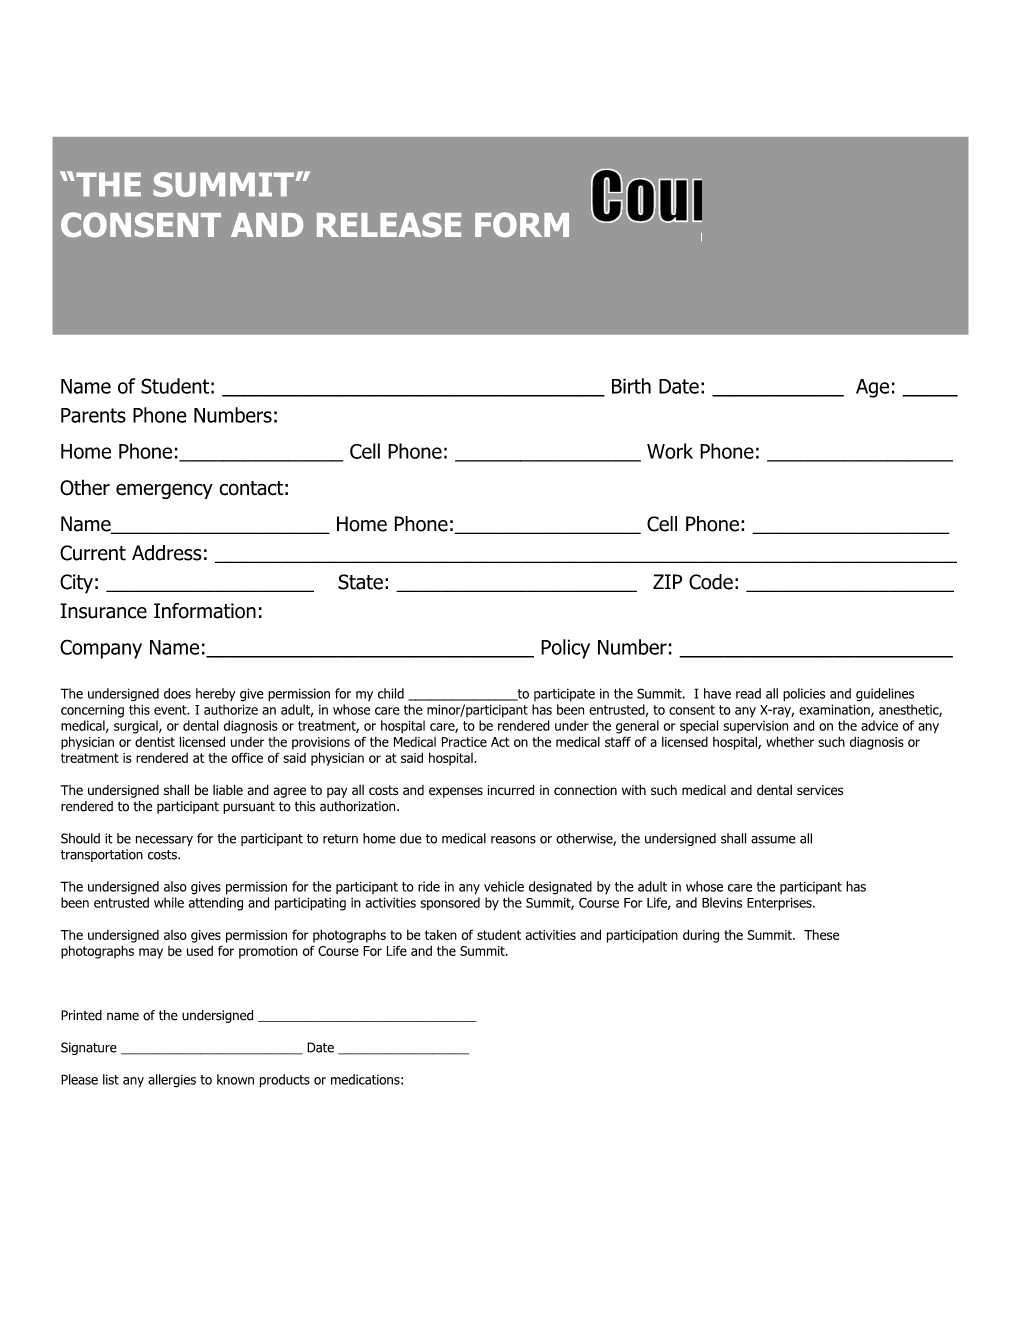 The Summit Application